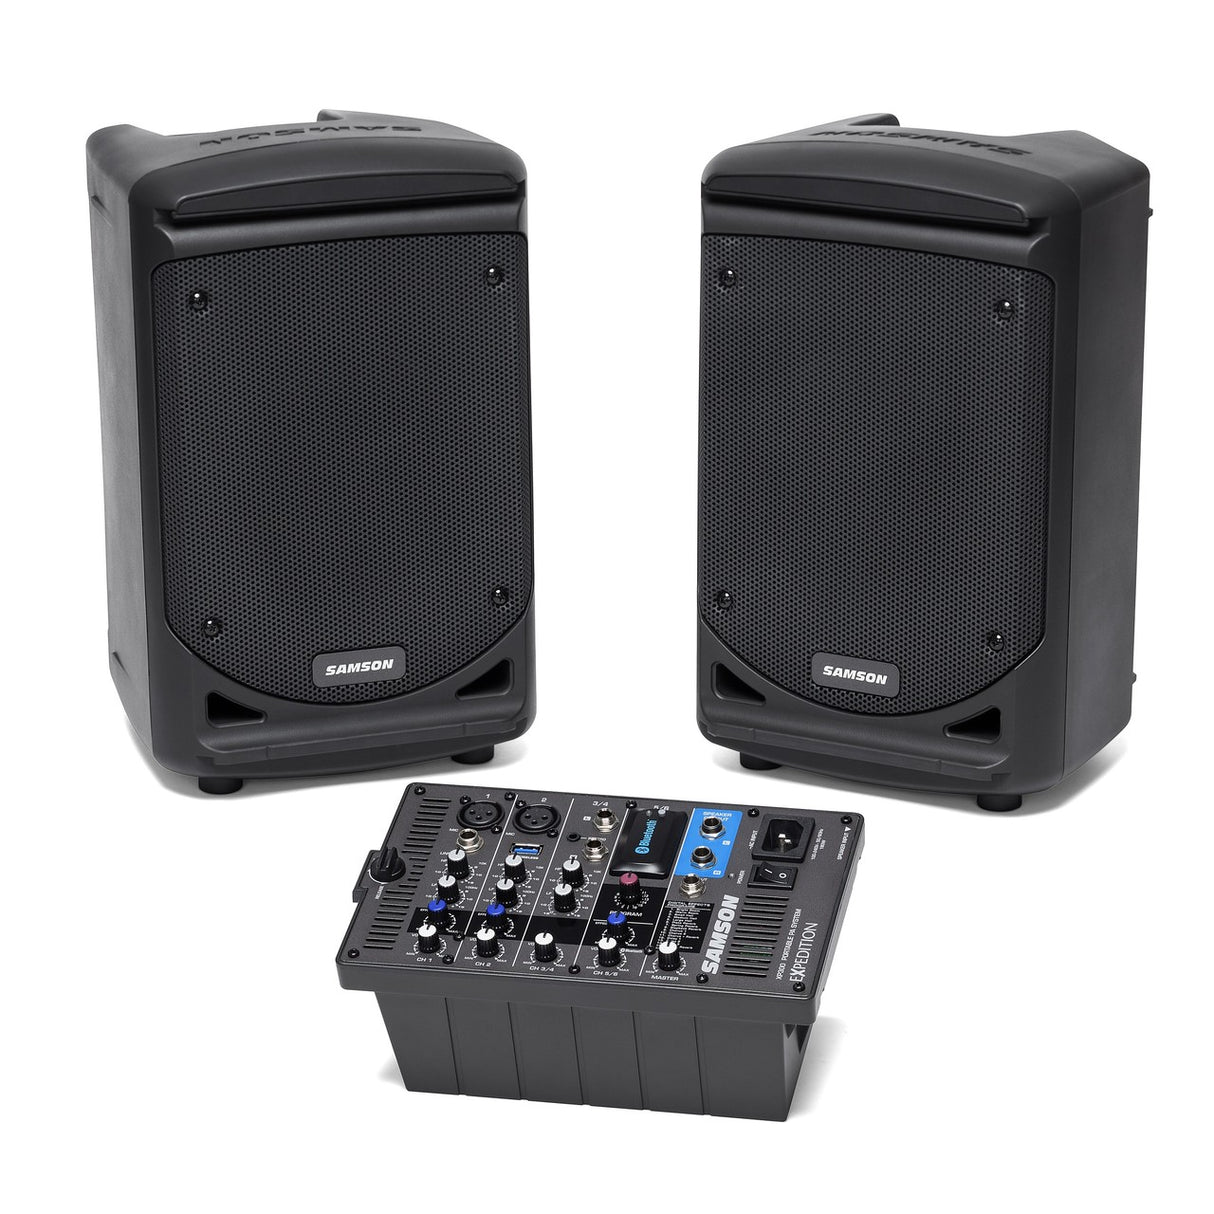 Samson Expedition XP300B | 300 Watt Portable PA Speakers with 6 Channel Powered Mixer